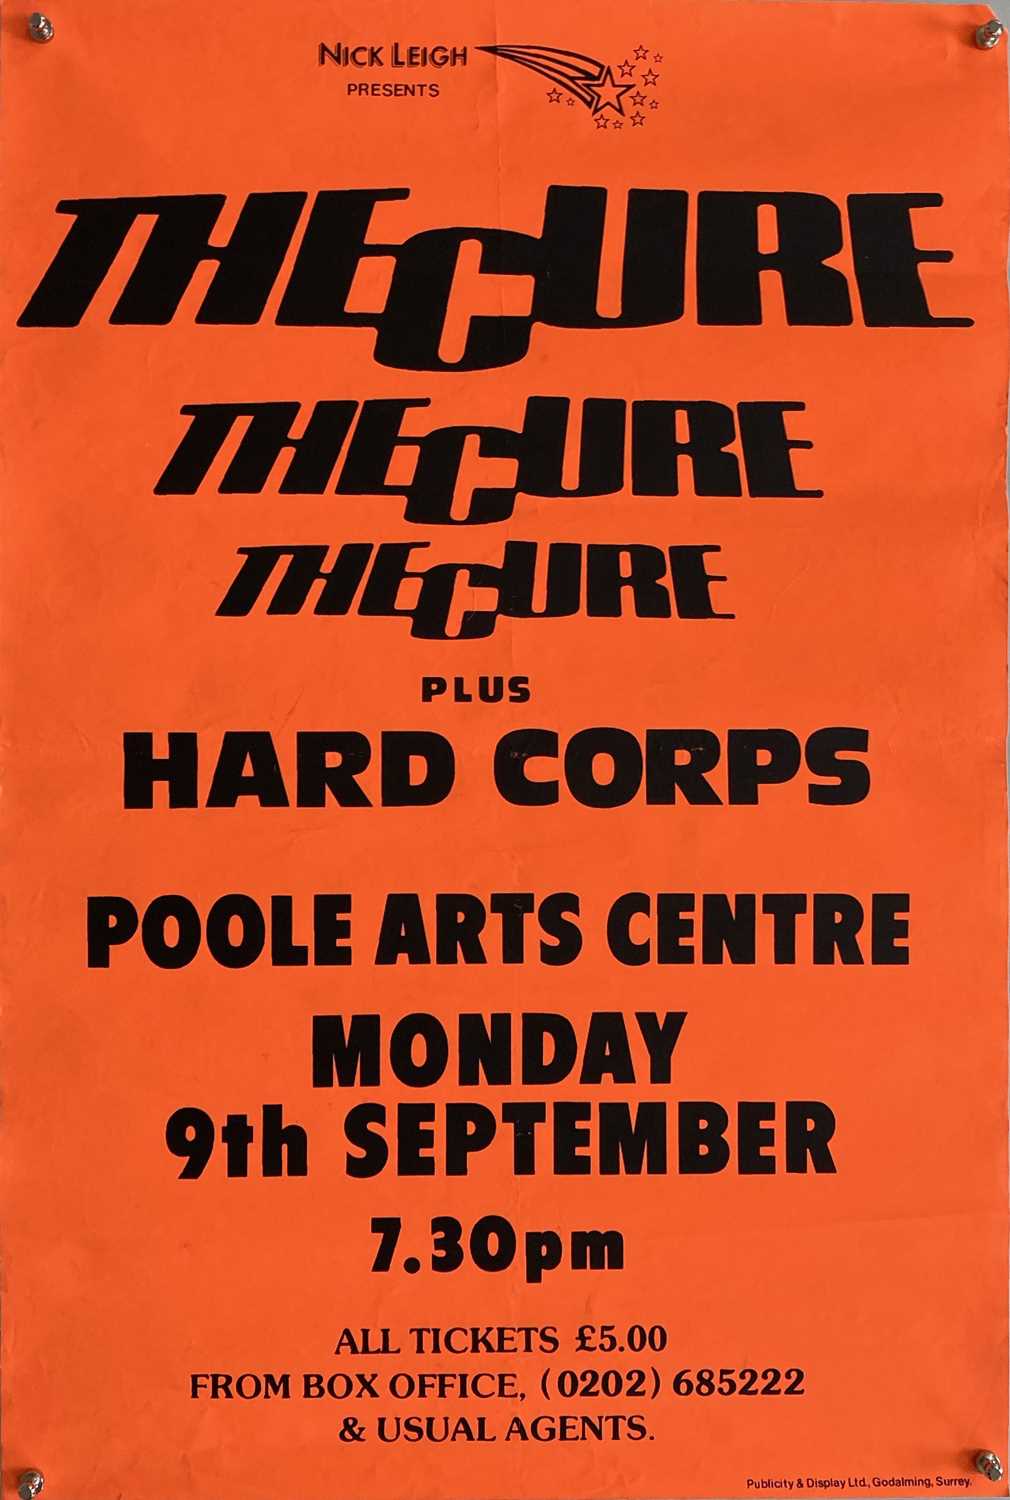 Lot 183 - THE CURE 1985 CONCERT POSTER.